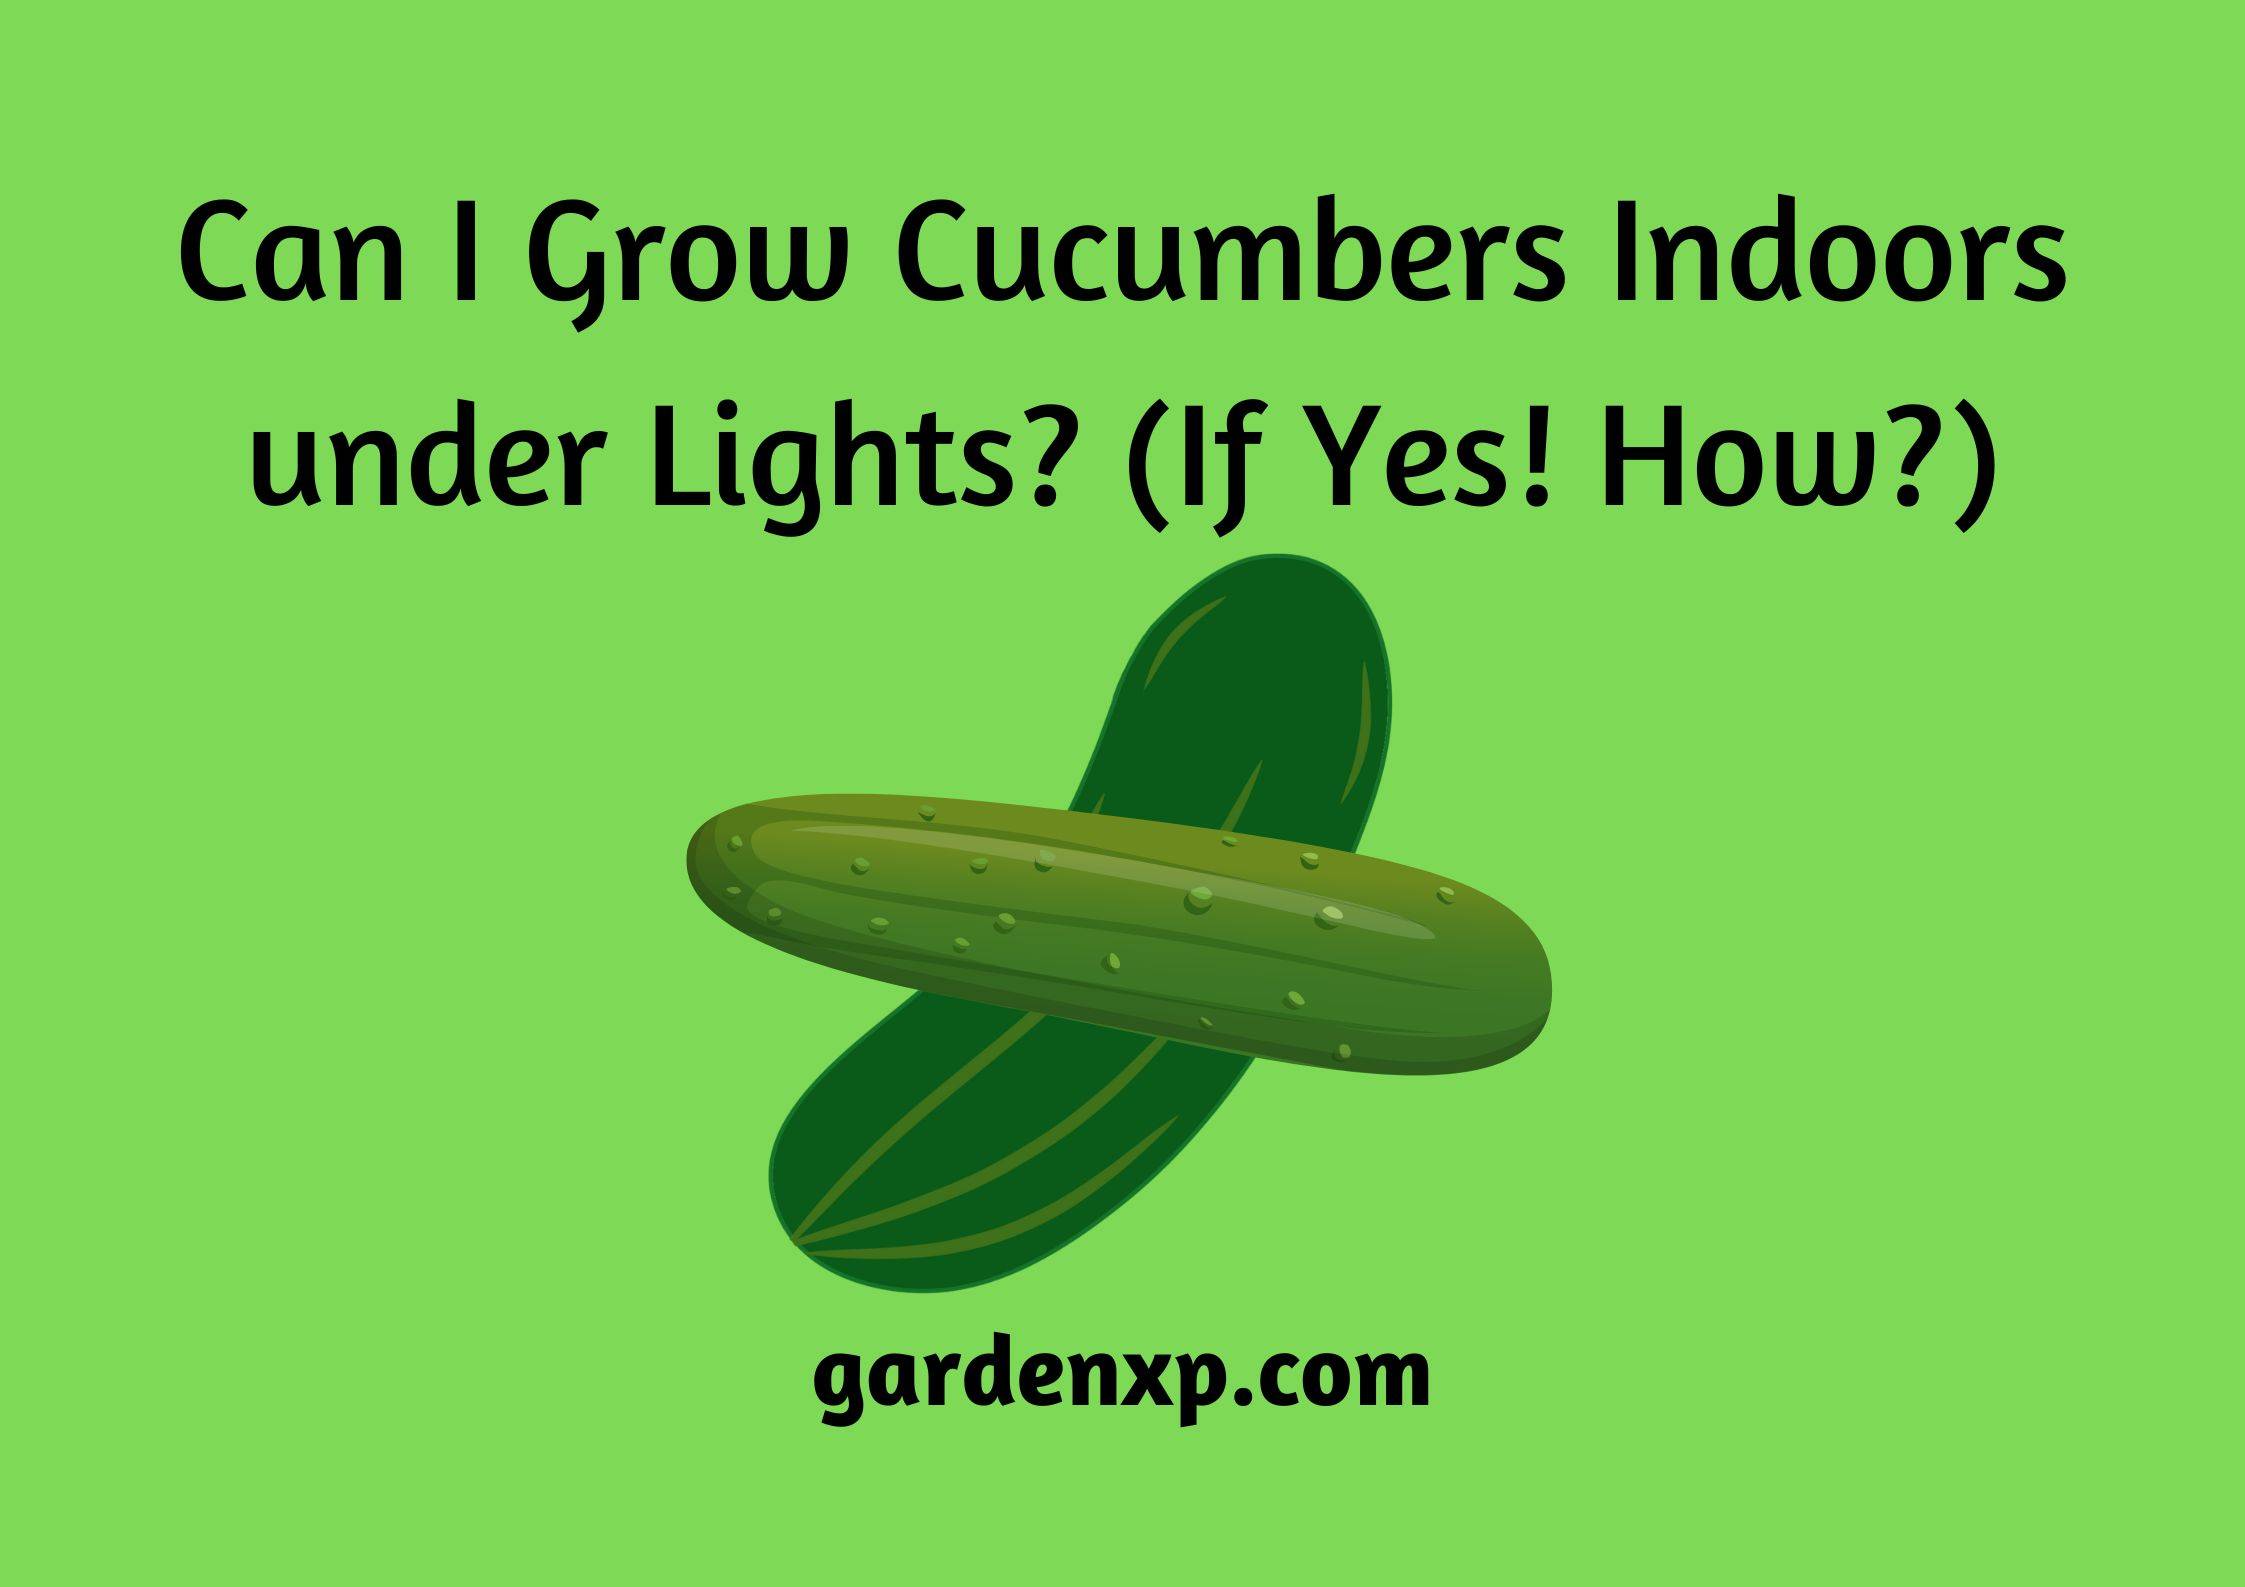 Can I Grow Cucumbers Indoors under Lights? (If Yes! How?)